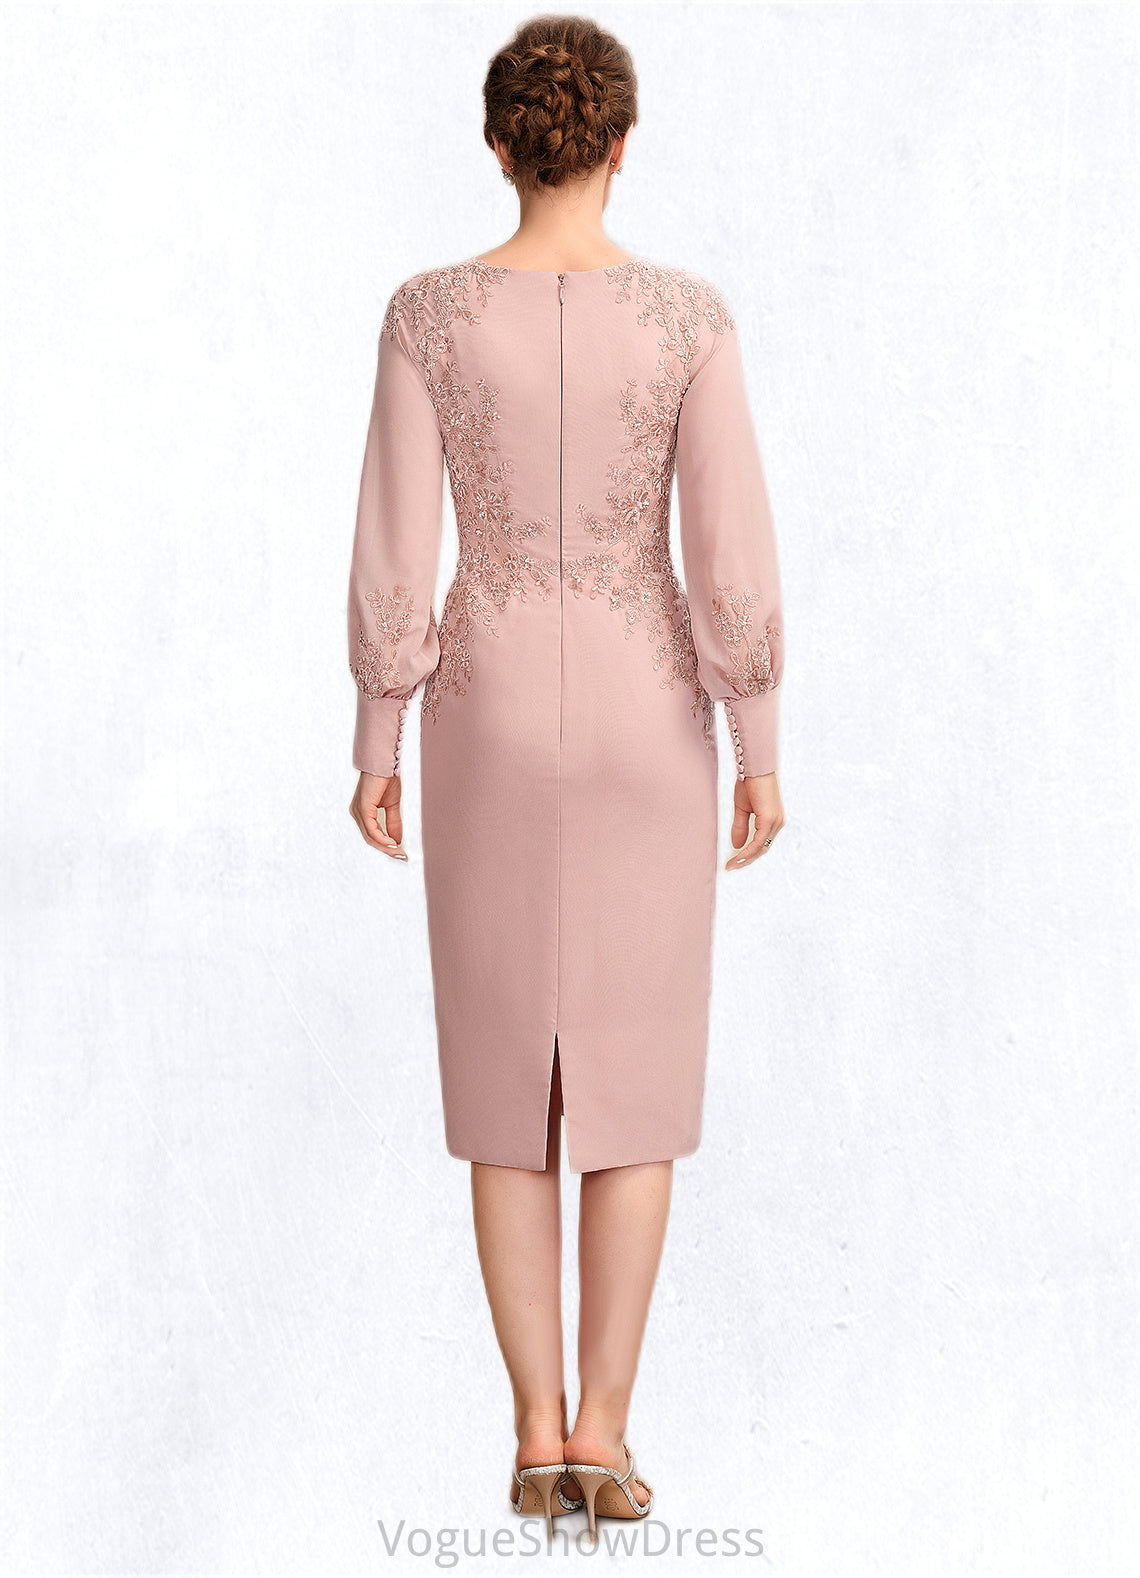 Leah Sheath/Column Scoop Neck Knee-Length Chiffon Lace Mother of the Bride Dress With Beading Sequins DL126P0015020